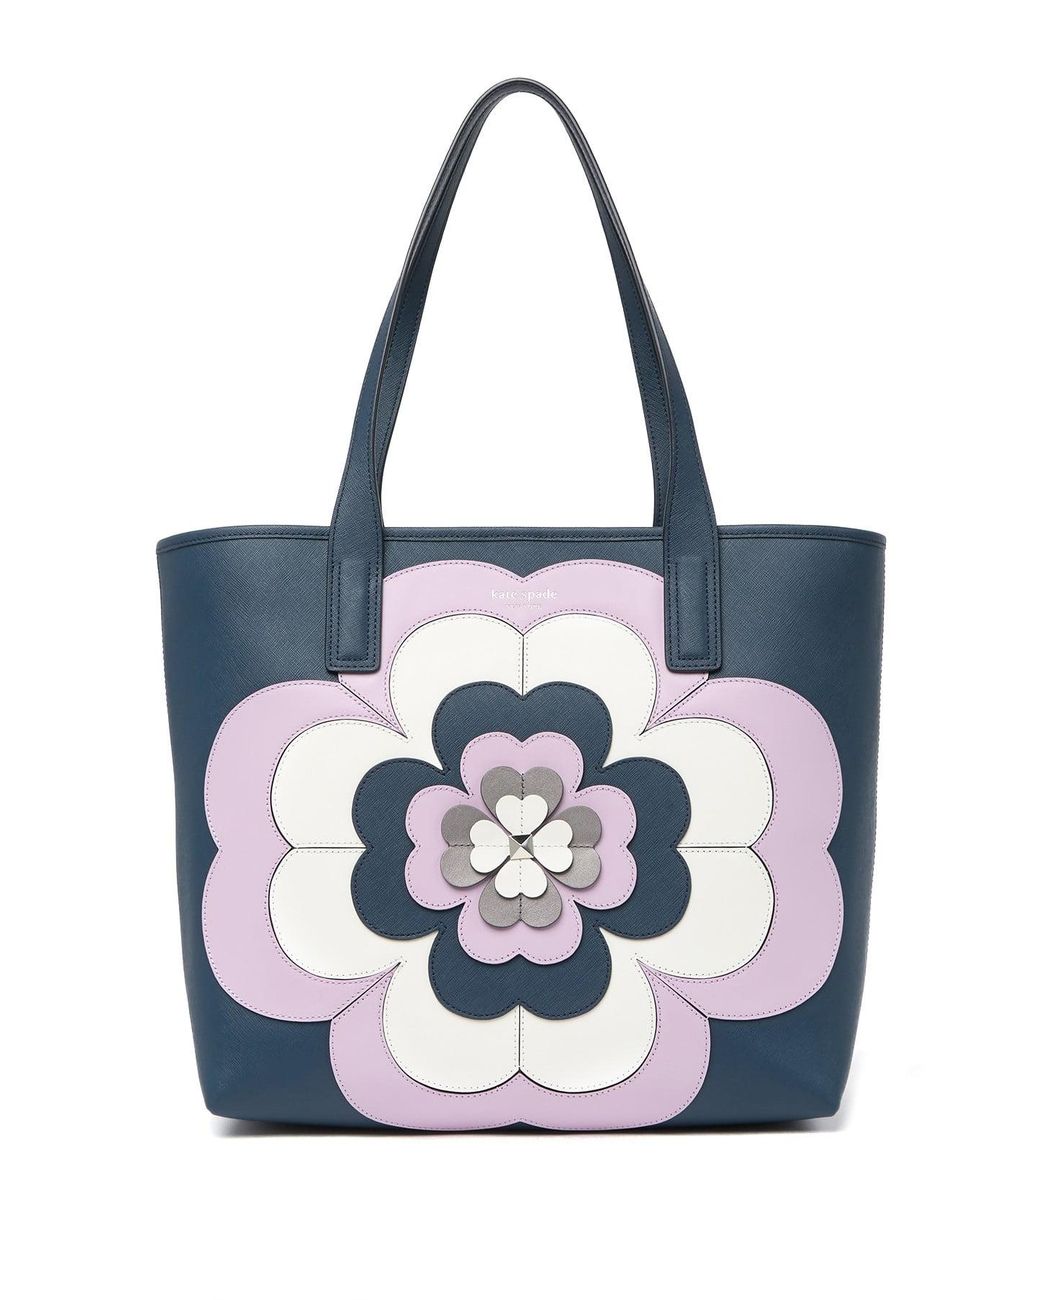 Kate Spade Reiley Spade Flower Applique Large Tote in Blue | Lyst